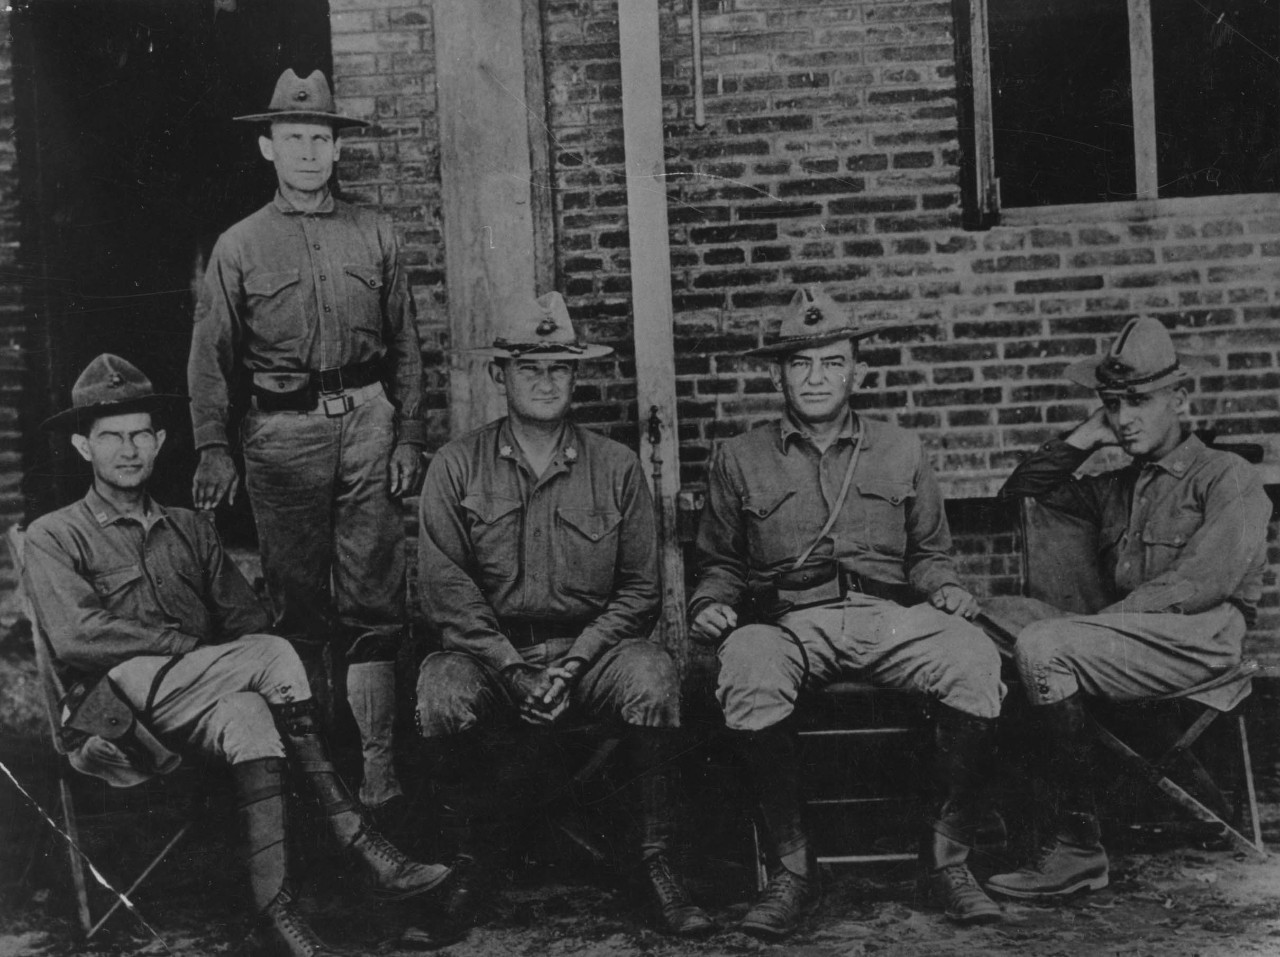 Five uniformed marine officers sit or stand for a photograph.